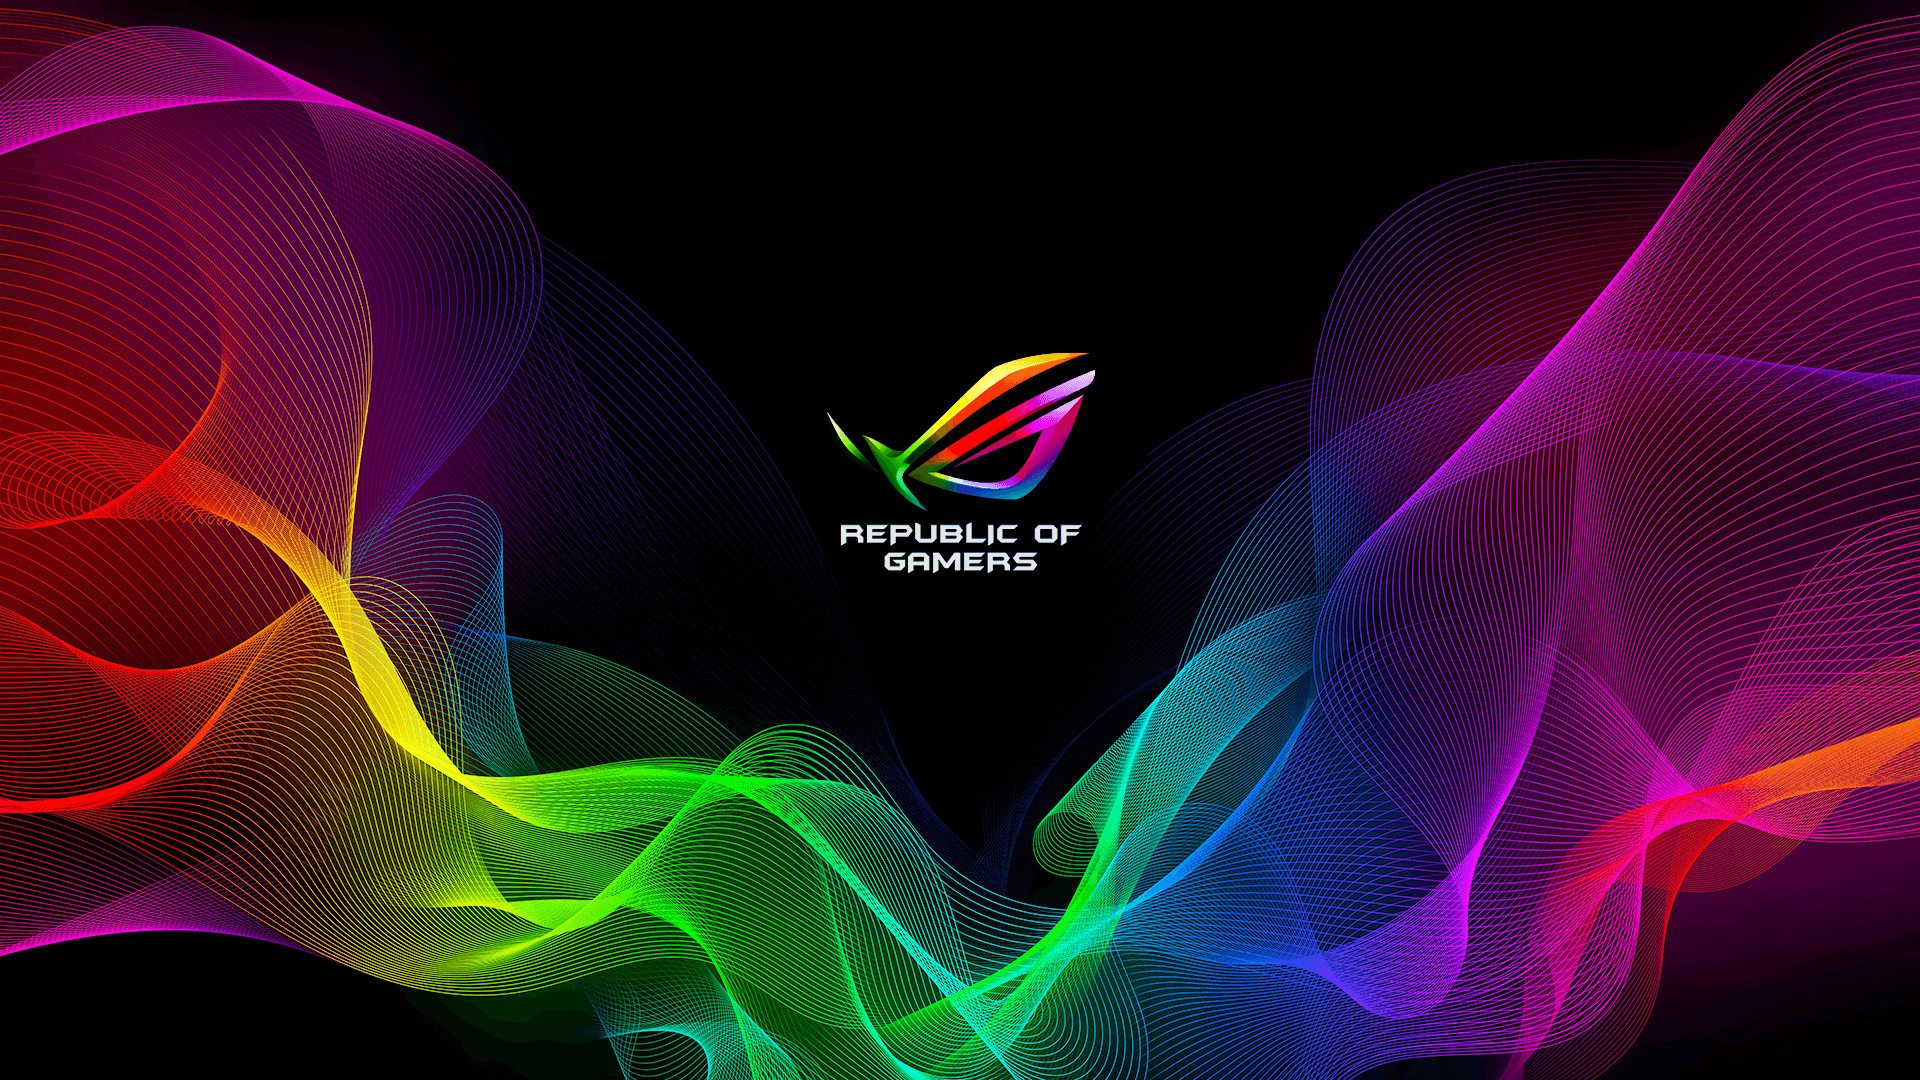 RGB ROG wallpaper based on the one from Razer. Desktop wallpaper, Smartphone wallpaper, Wallpaper